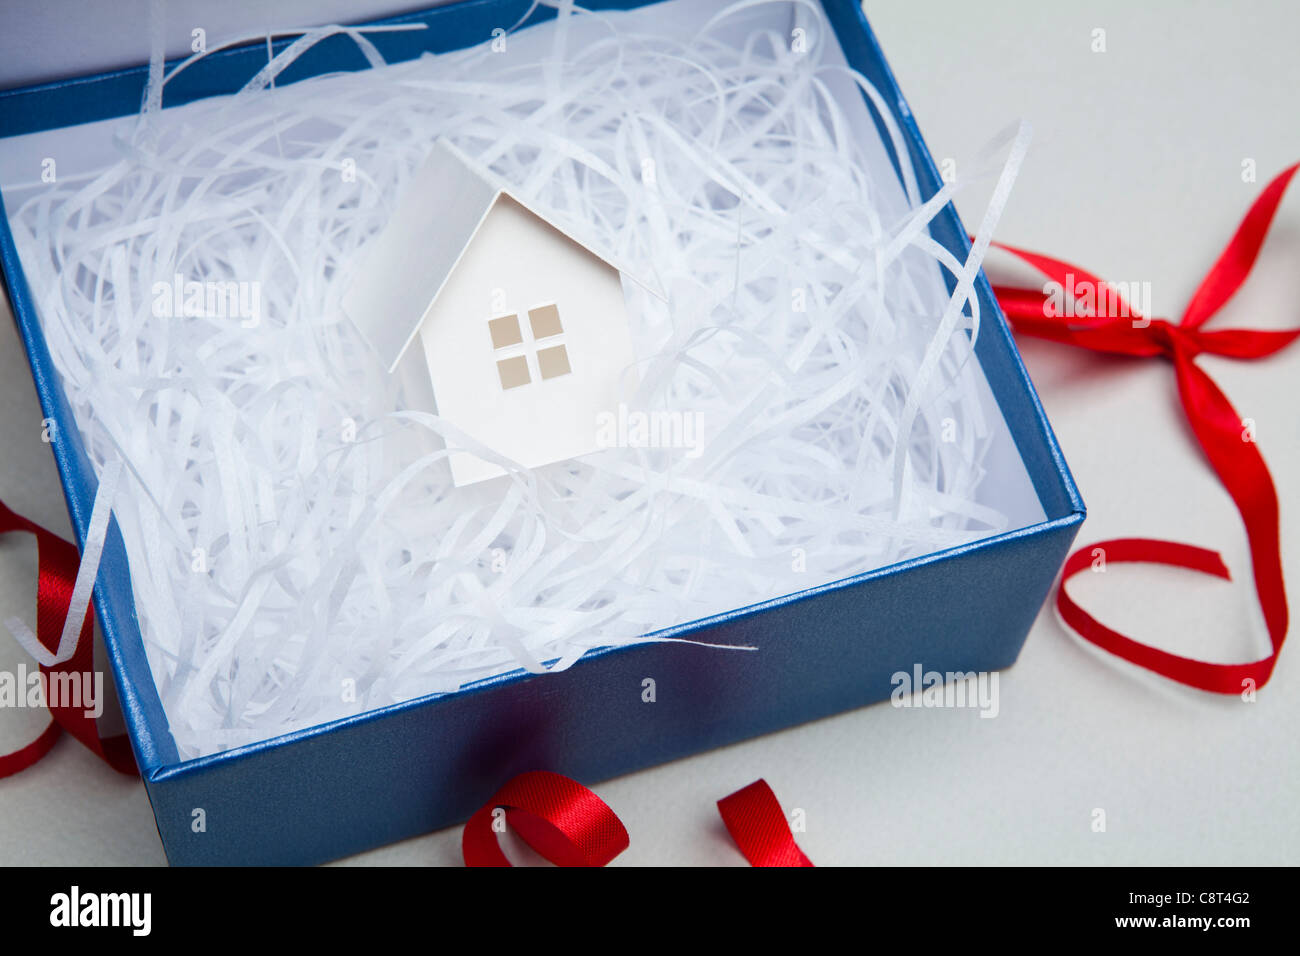 Gift With Red Ribbon And House Model Stock Photo